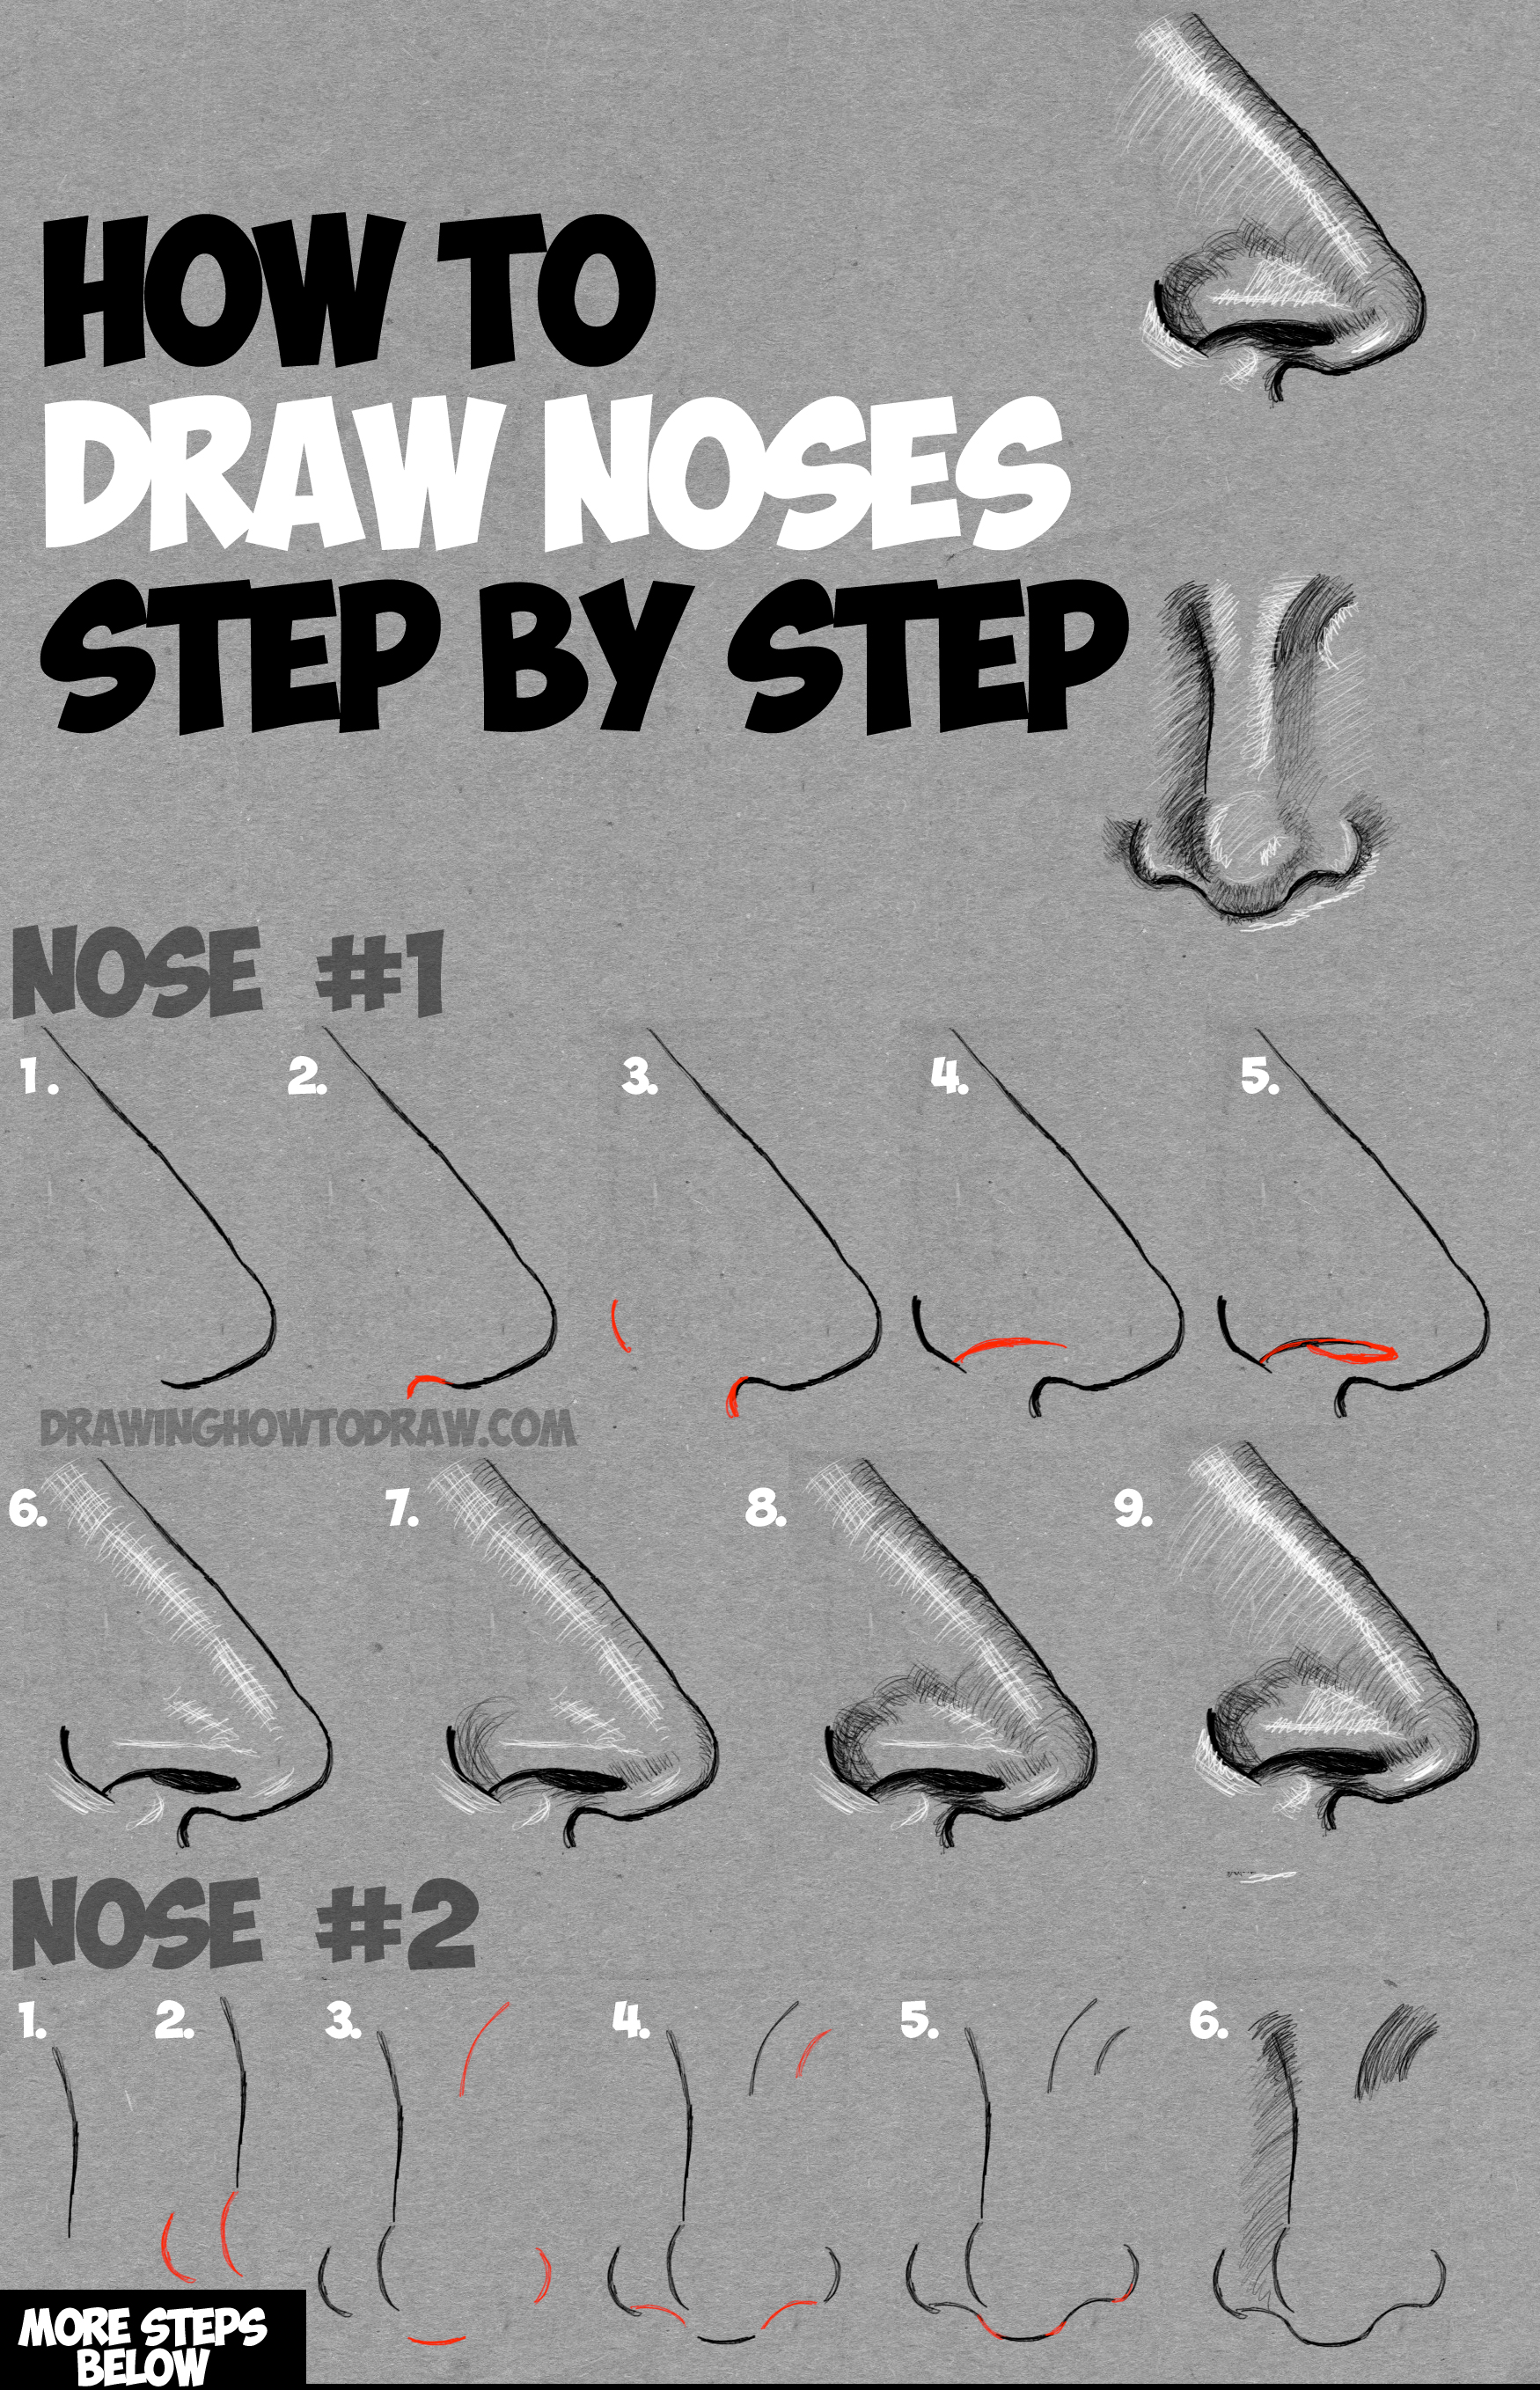 How To Draw A Nose From The Left Side How to draw a nose in the side